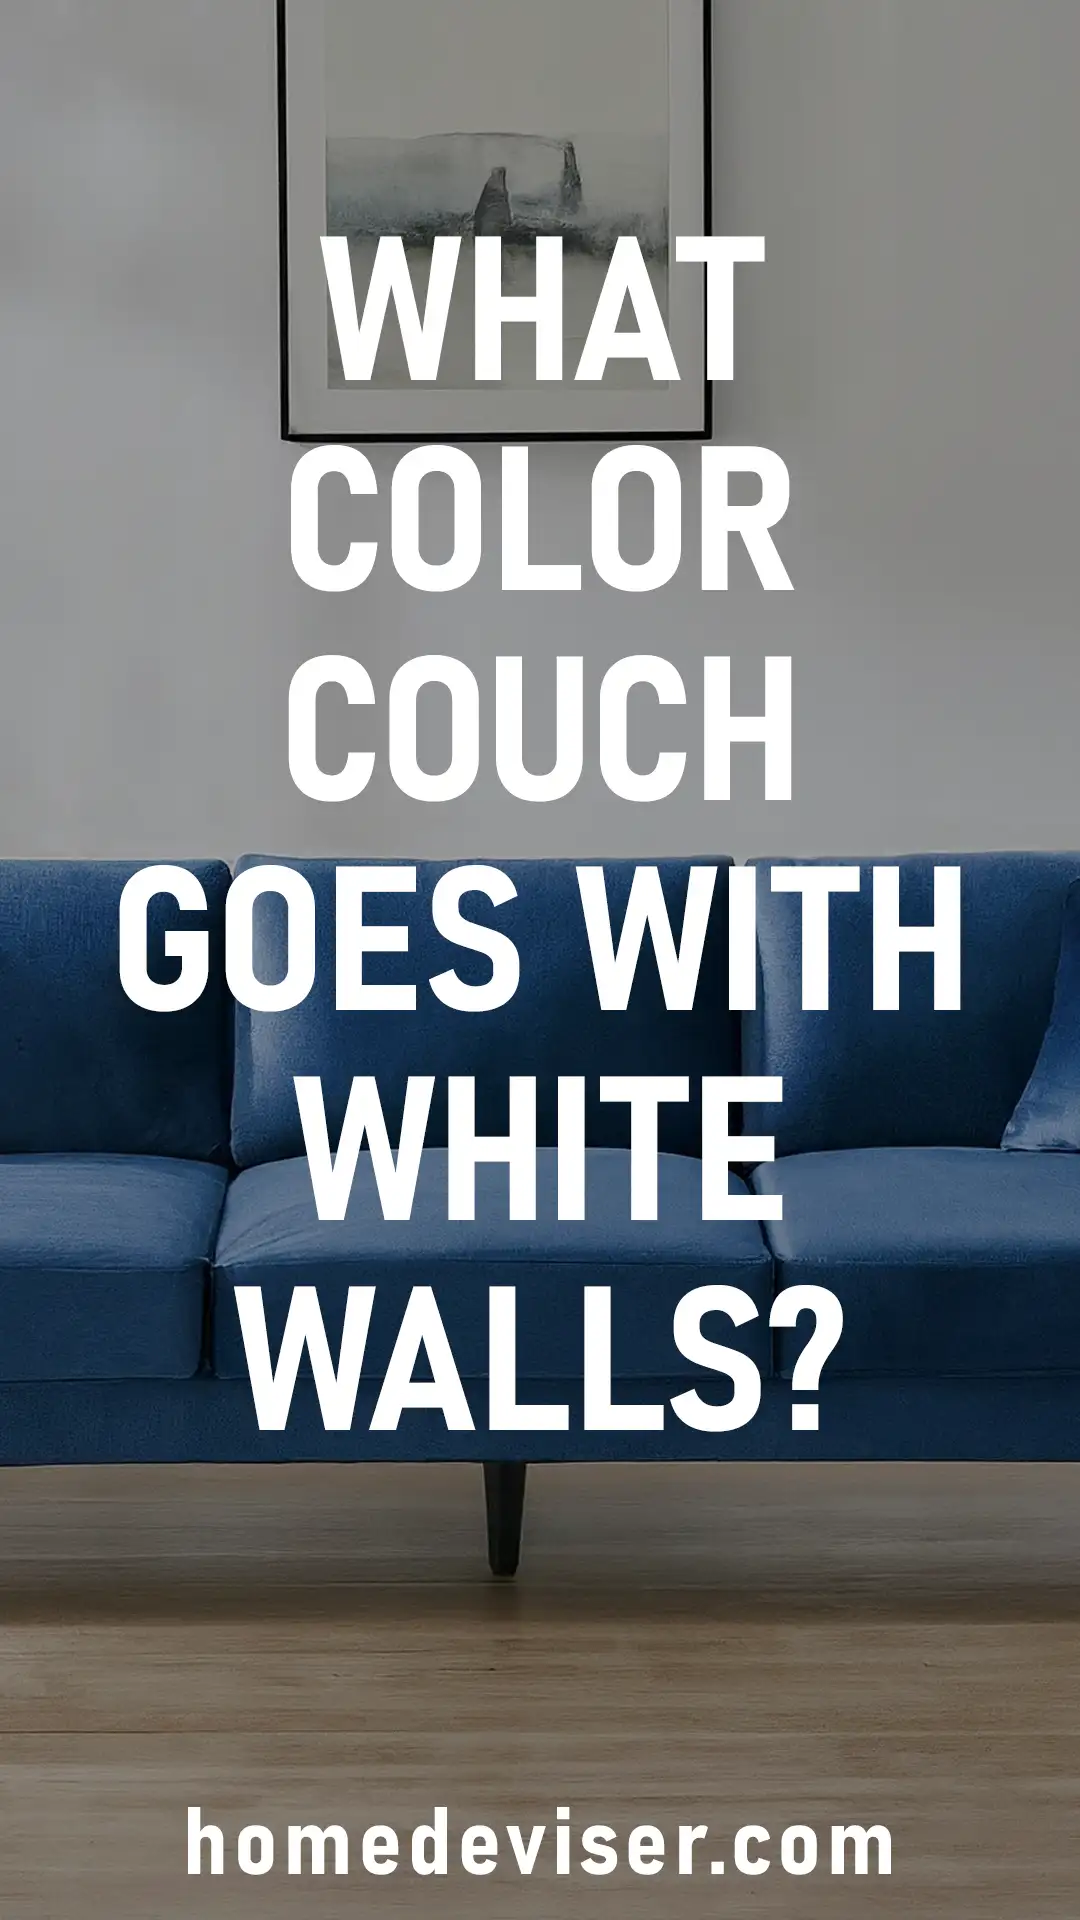 What Color Couch Goes With White Walls